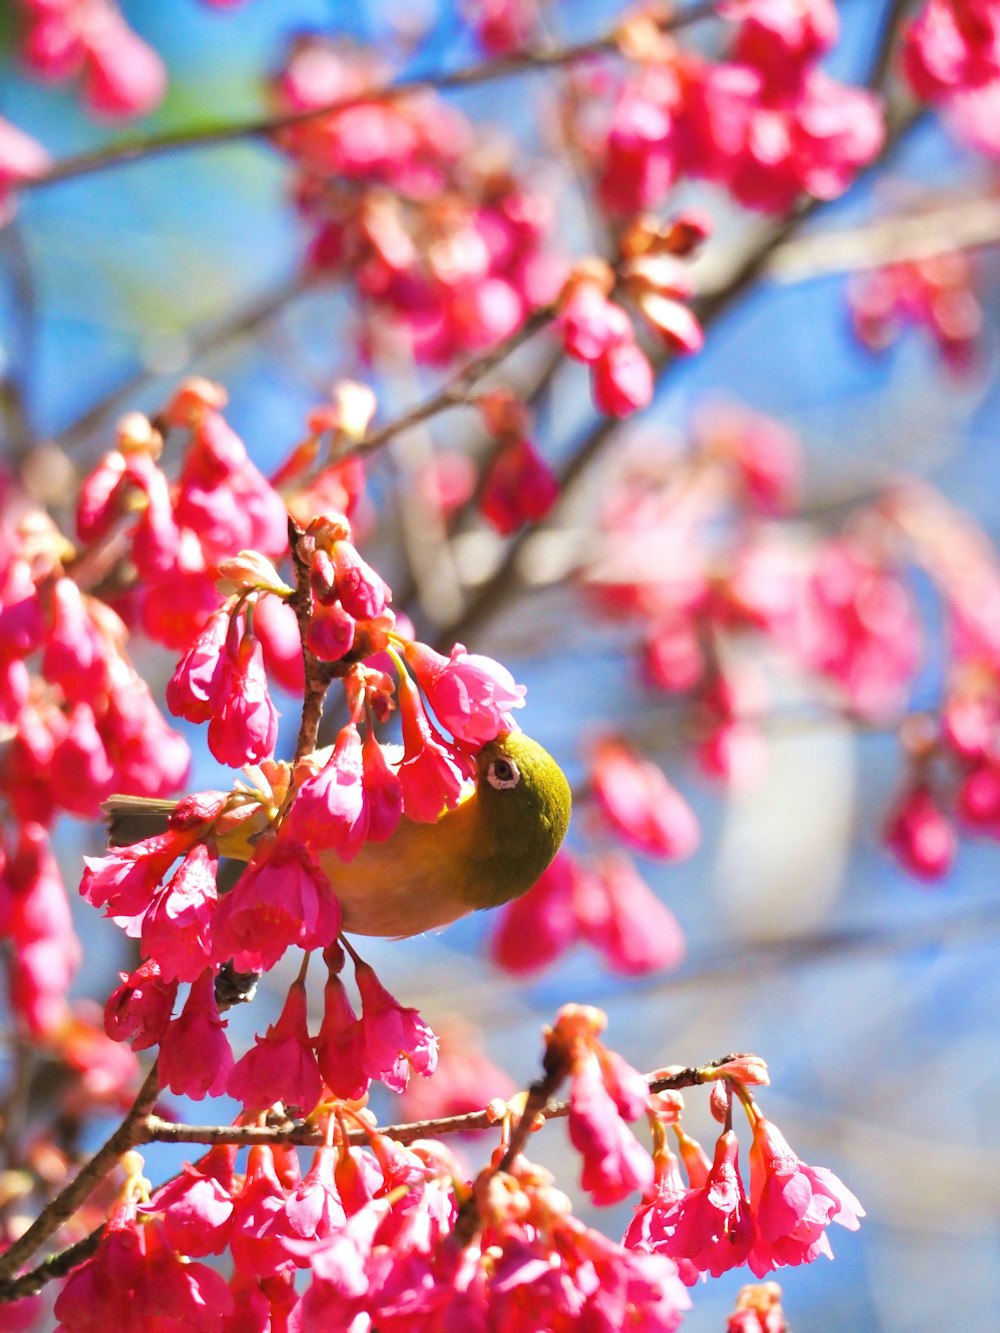 a bird sitting on a branch of a tree with pink flowers